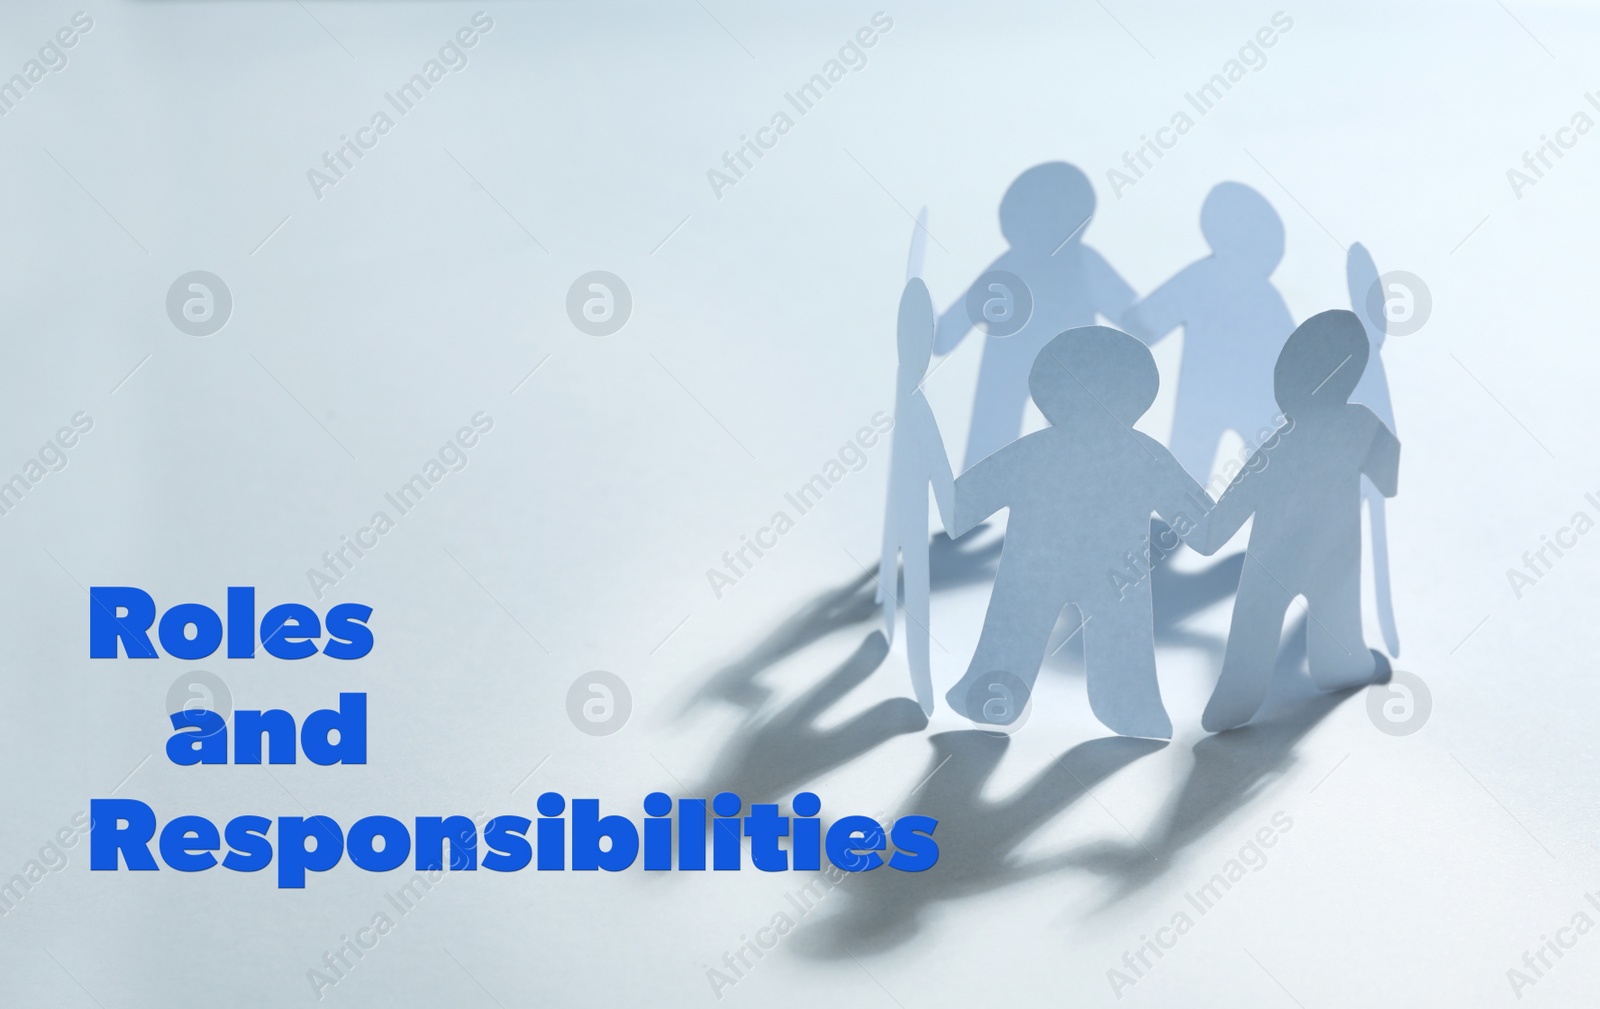 Image of Roles and Responsibilities. Paper people chain making circle on light background